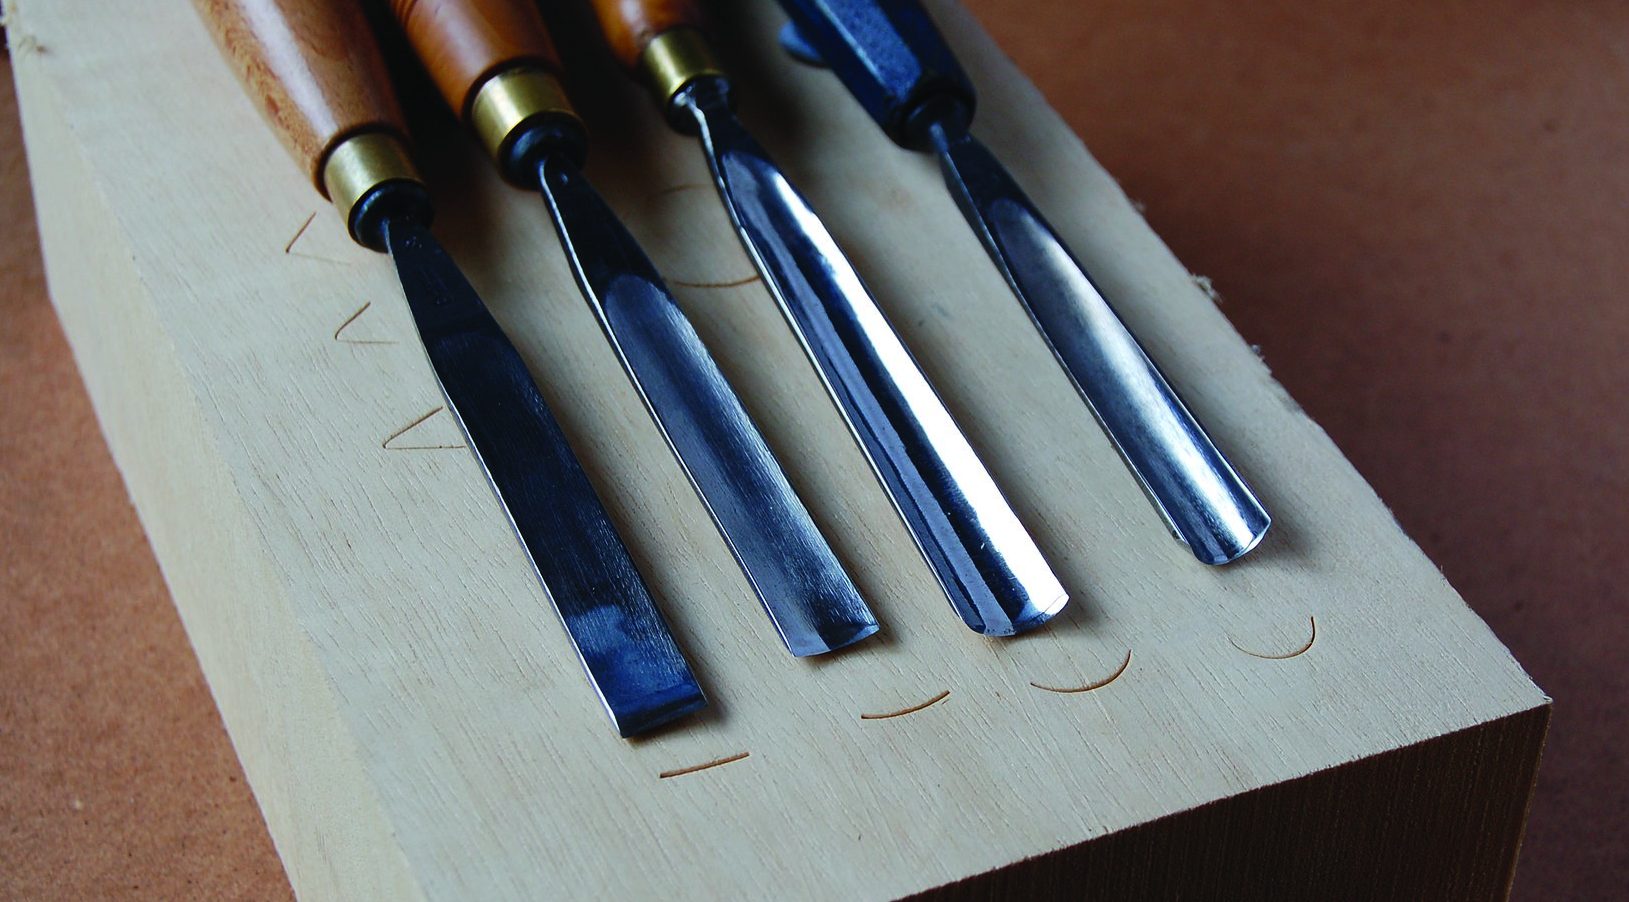 Sharpening a Carving Knife - Woodcarving Illustrated